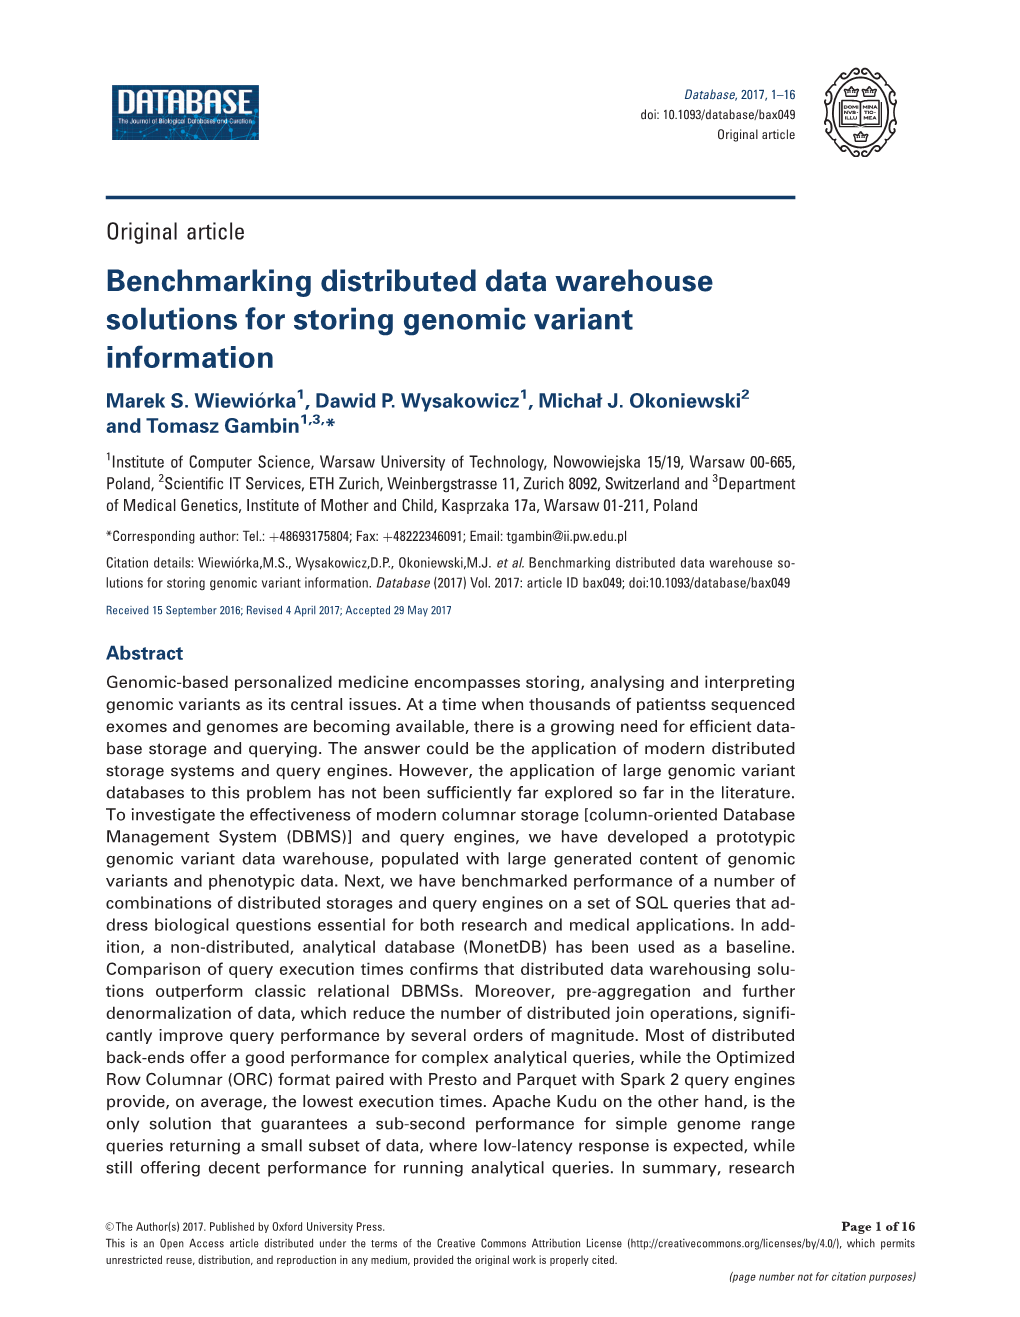 Benchmarking Distributed Data Warehouse Solutions for Storing Genomic Variant Information Marek S